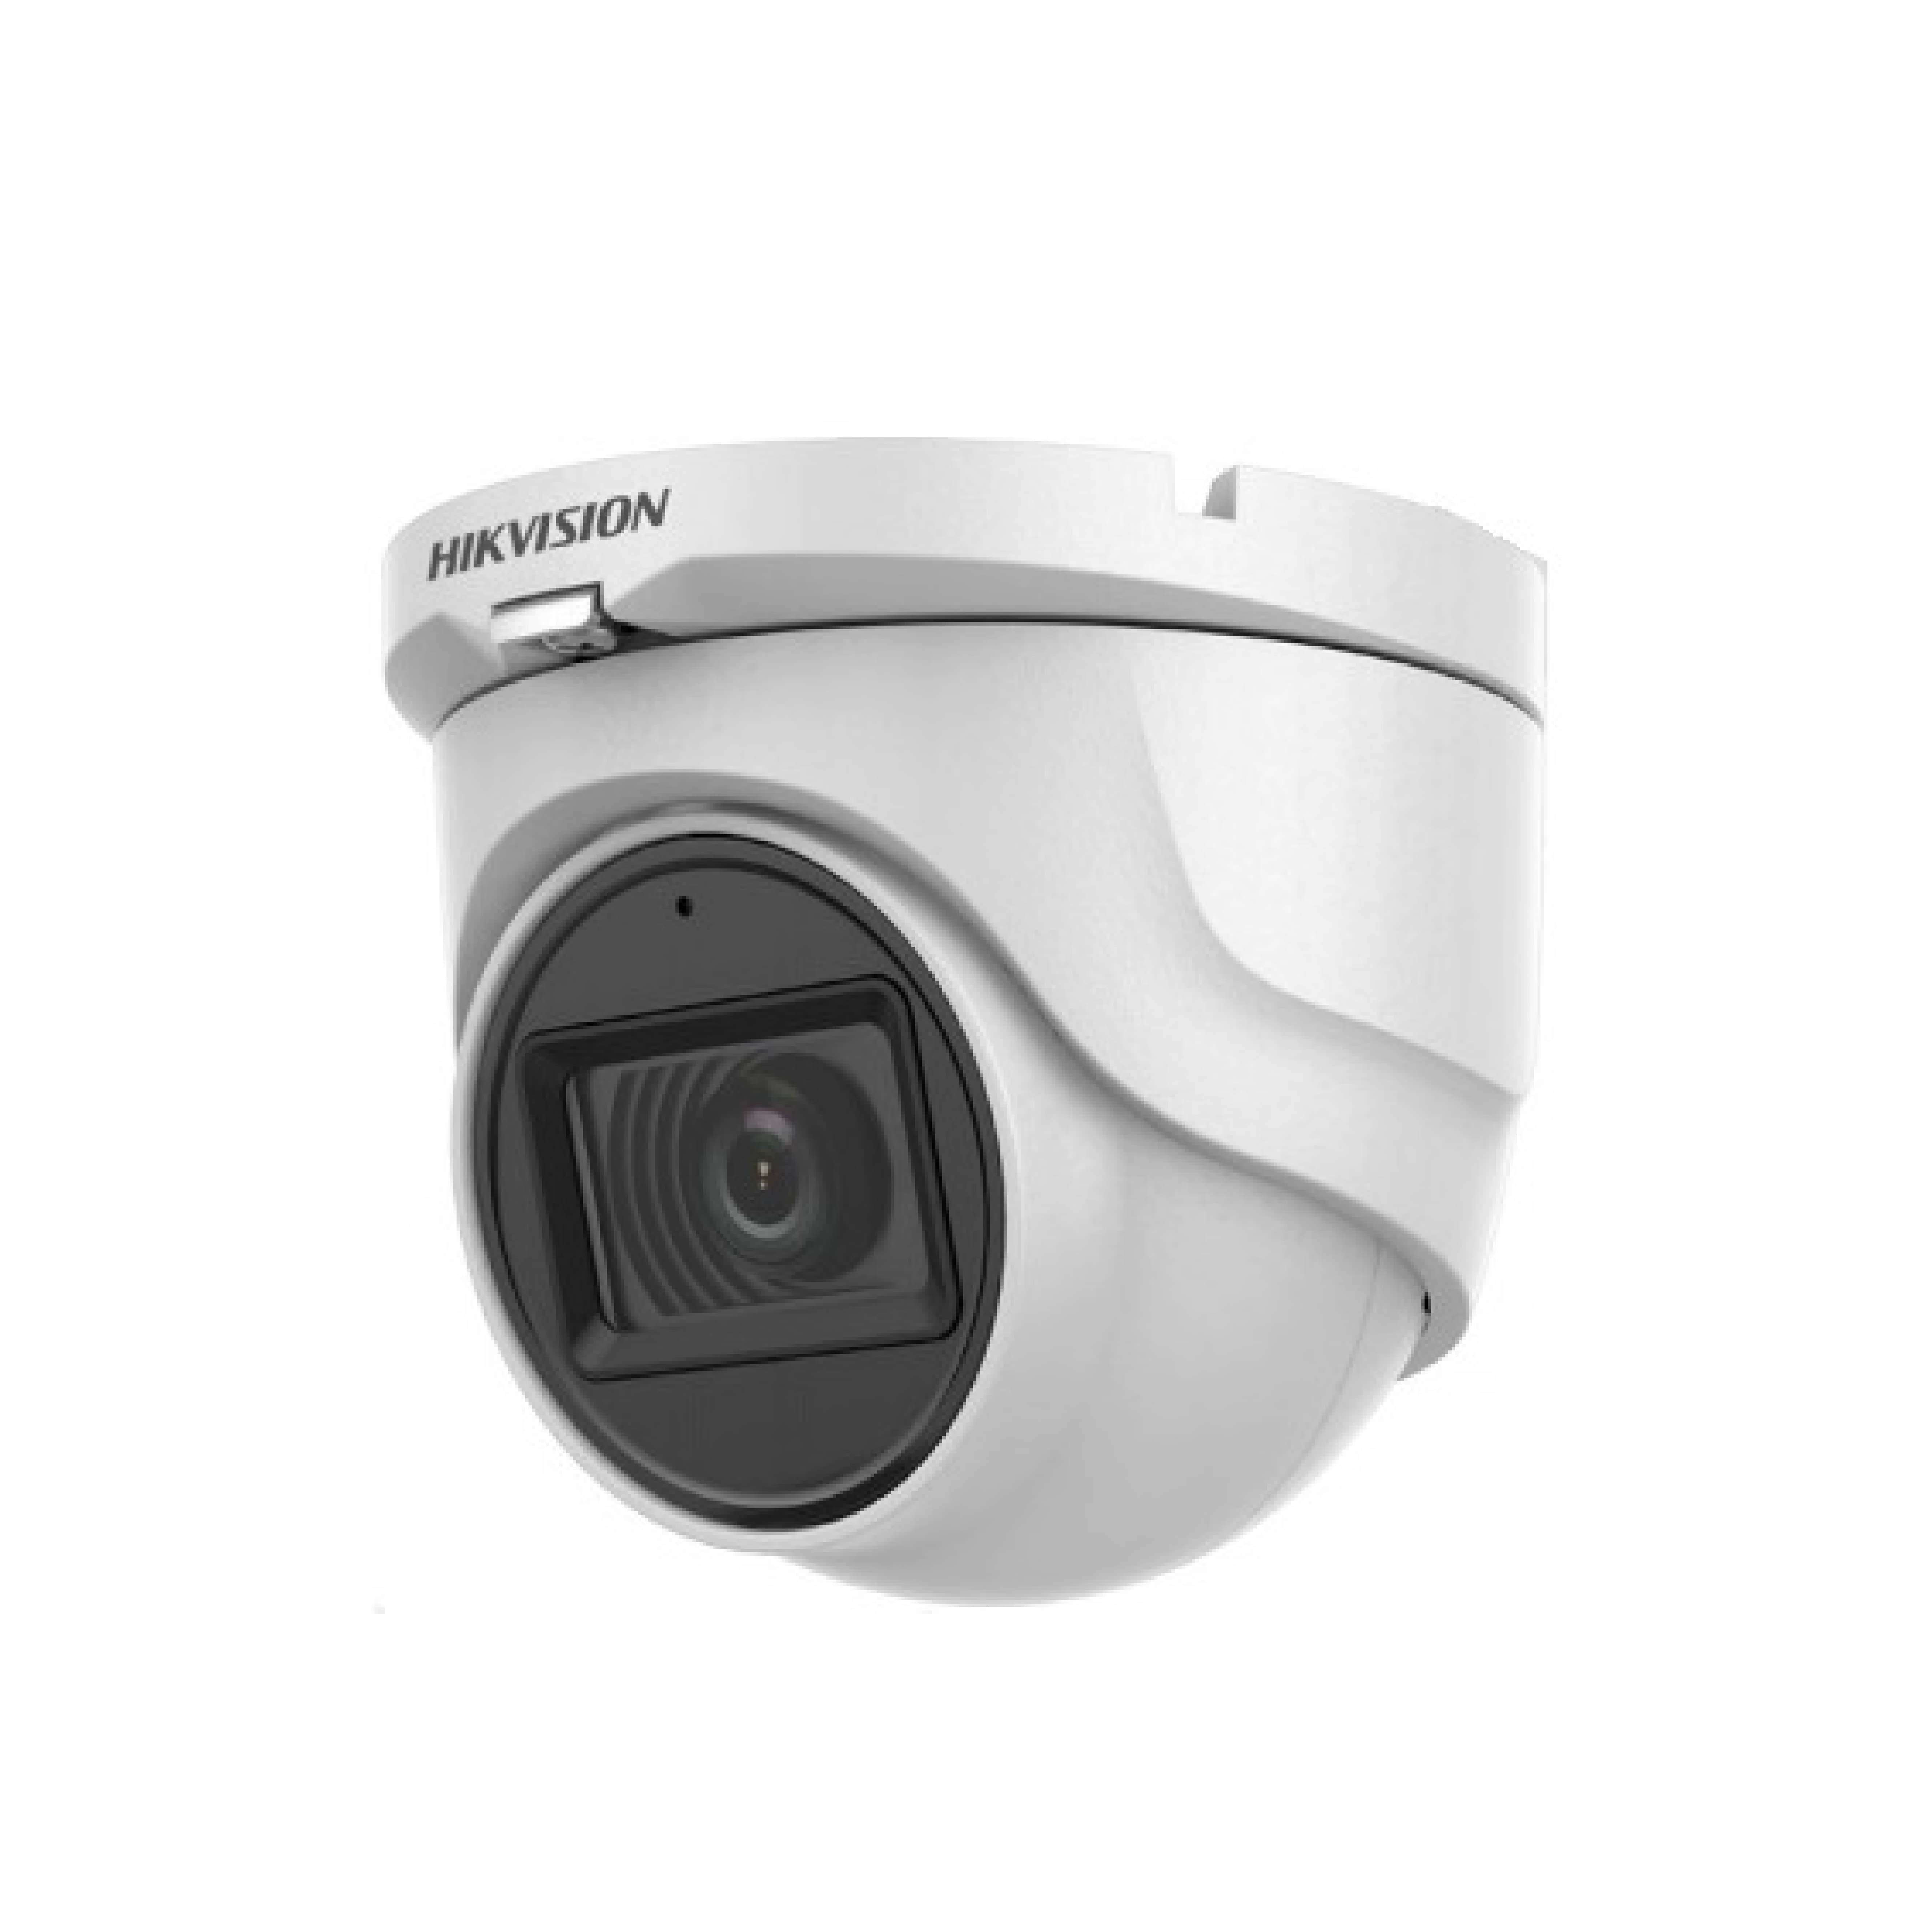 Camera đồng trục Hikvision DS-2CE76H0T-ITMFS 5.0 Mpx